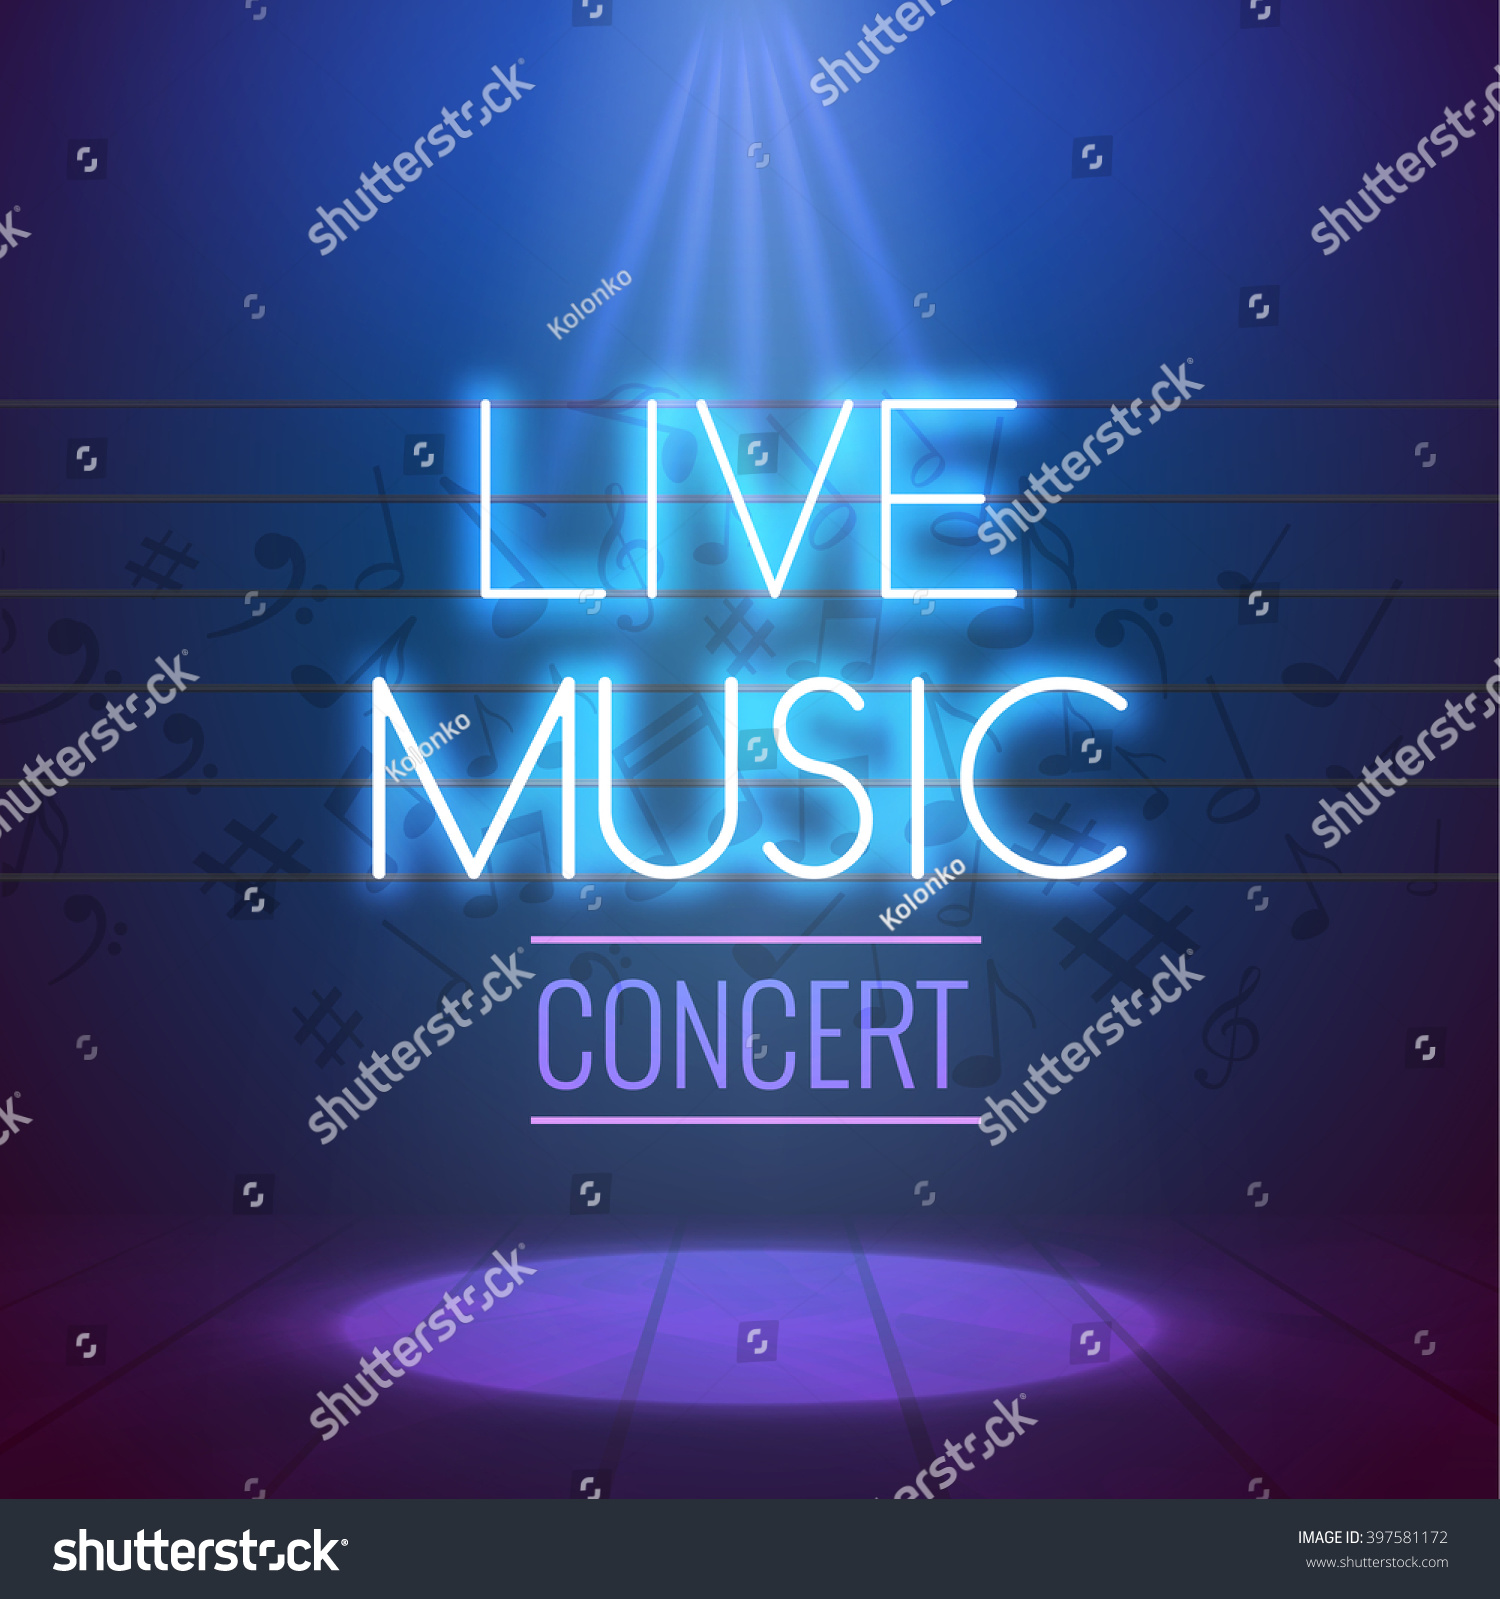 Neon Live Music Concert Acoustic Party Poster Background